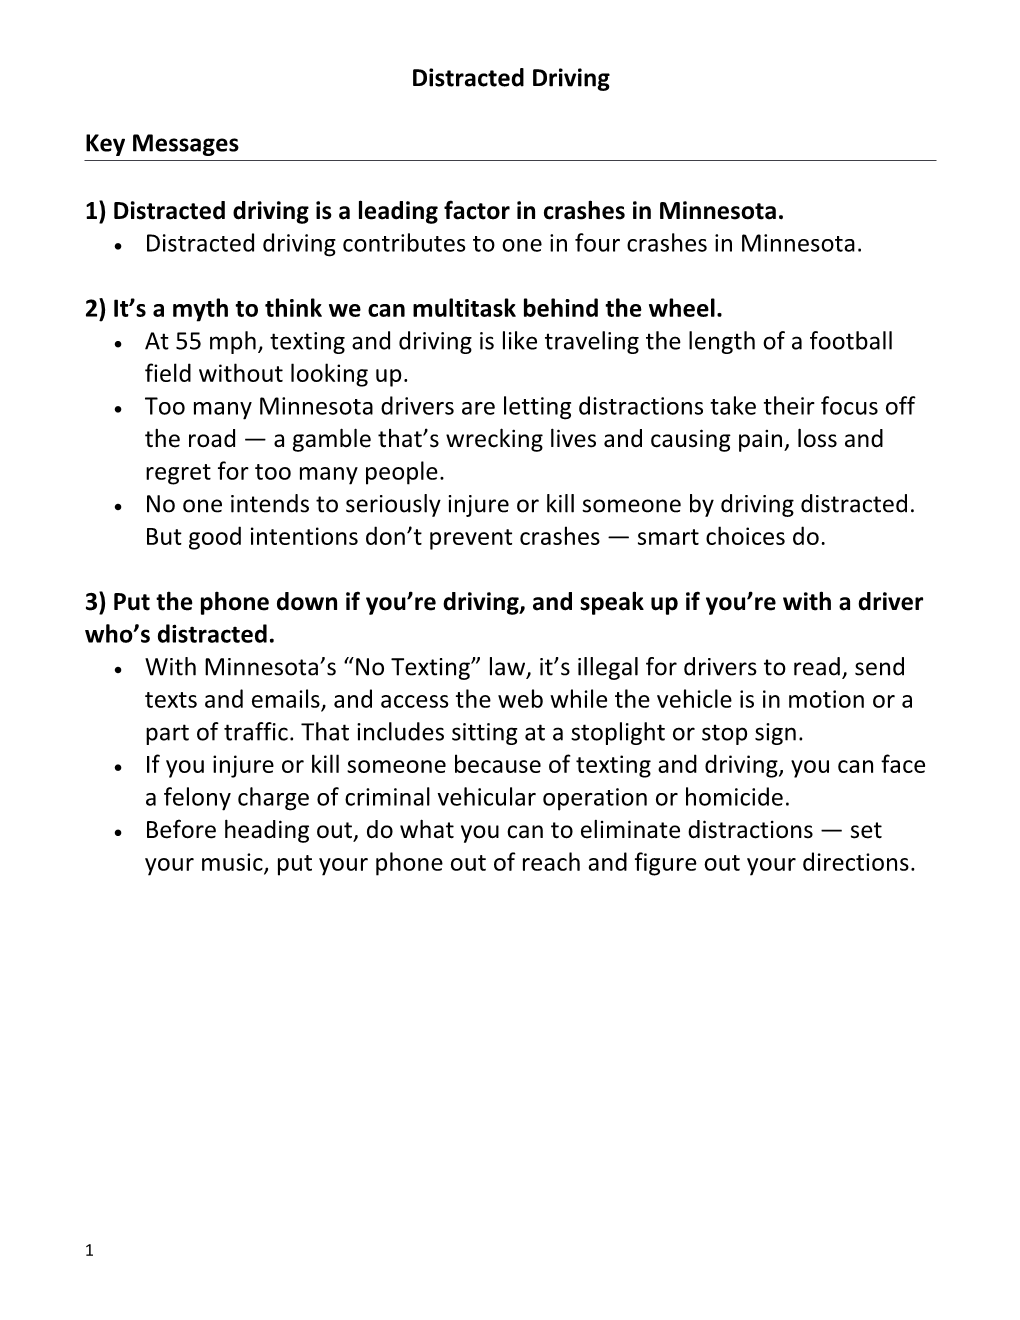 1) Distracted Driving Is a Leading Factor in Crashes in Minnesota